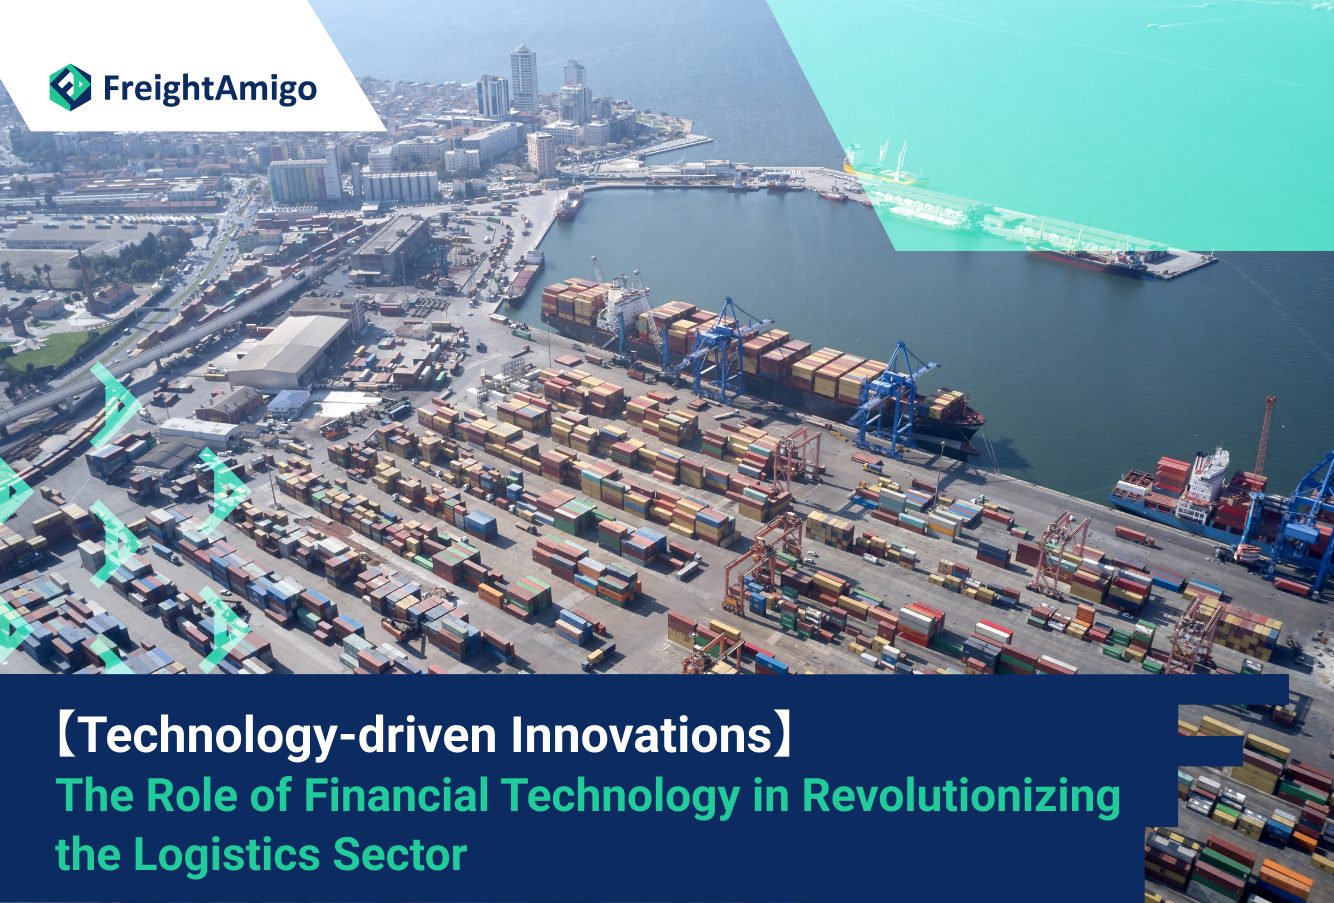 【Technology-driven Innovations】 The Role of Financial Technology in Revolutionizing the Logistics Sector